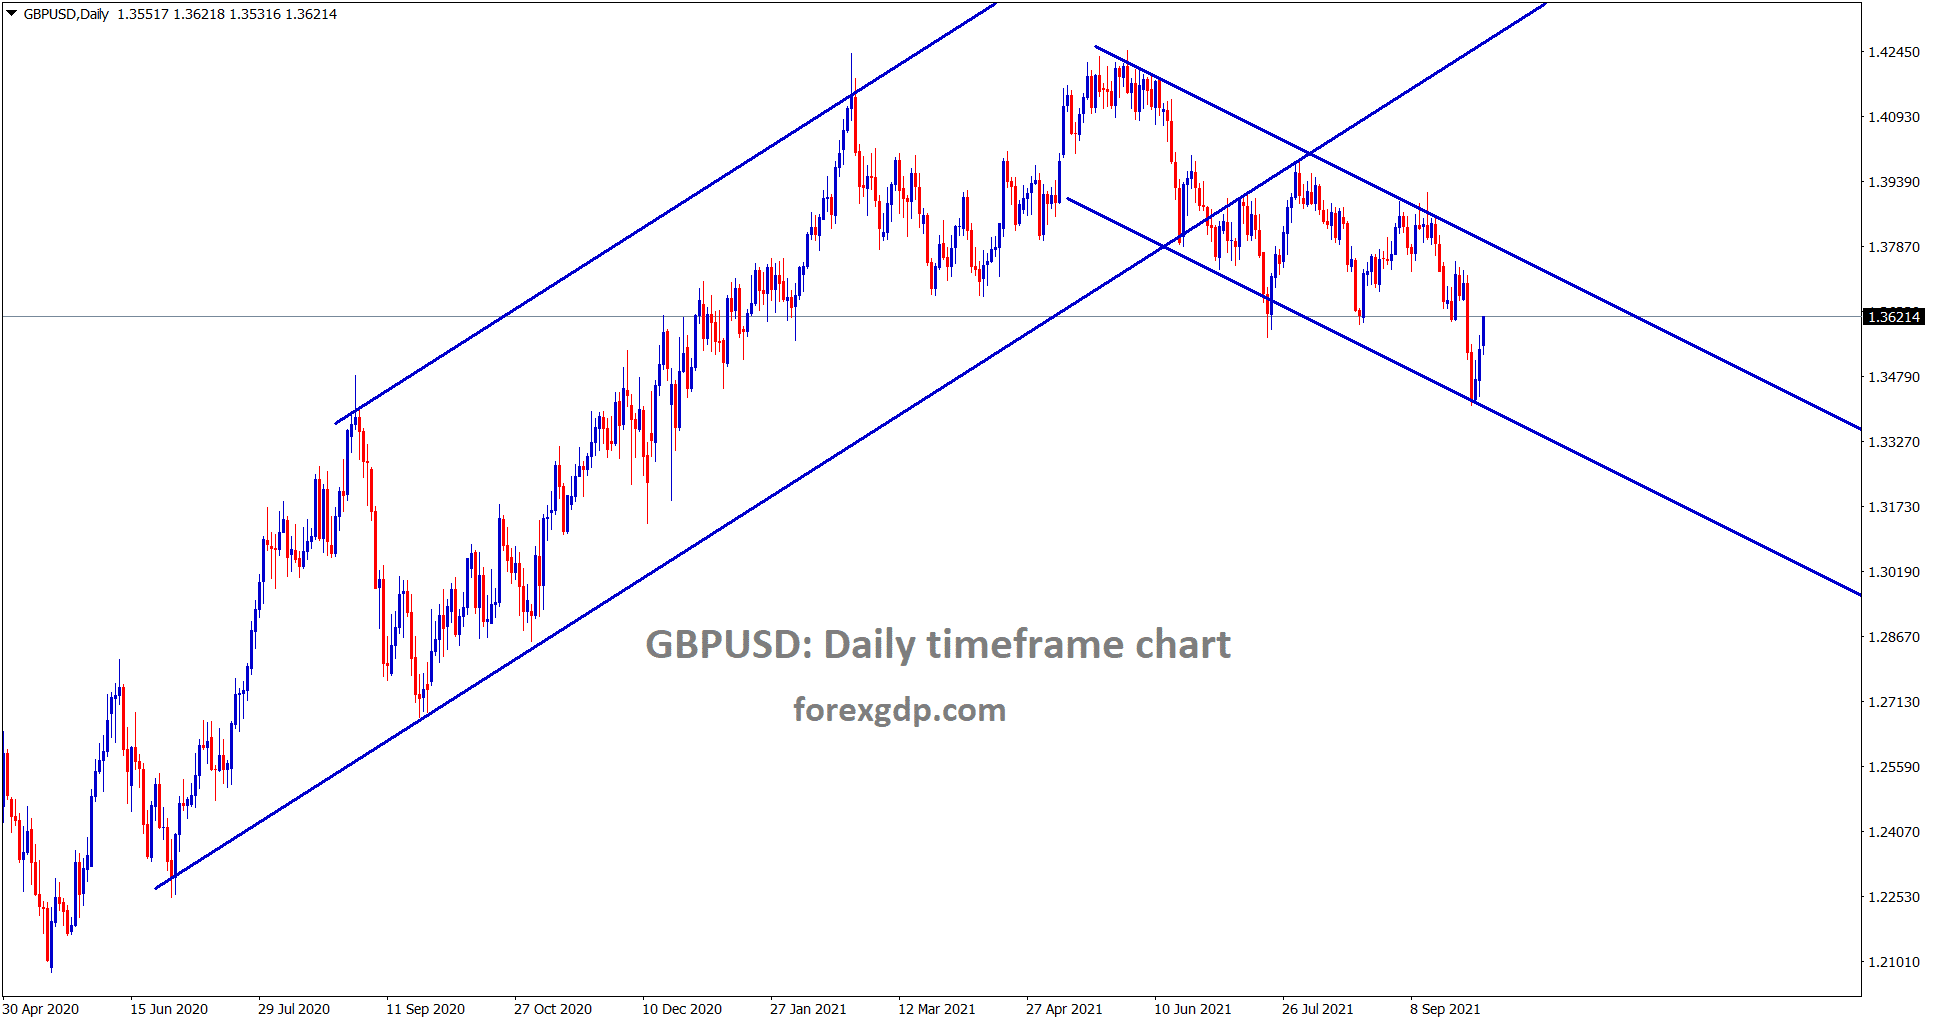 GBPUSD is rebounding faster from the lower low level of a descending channel